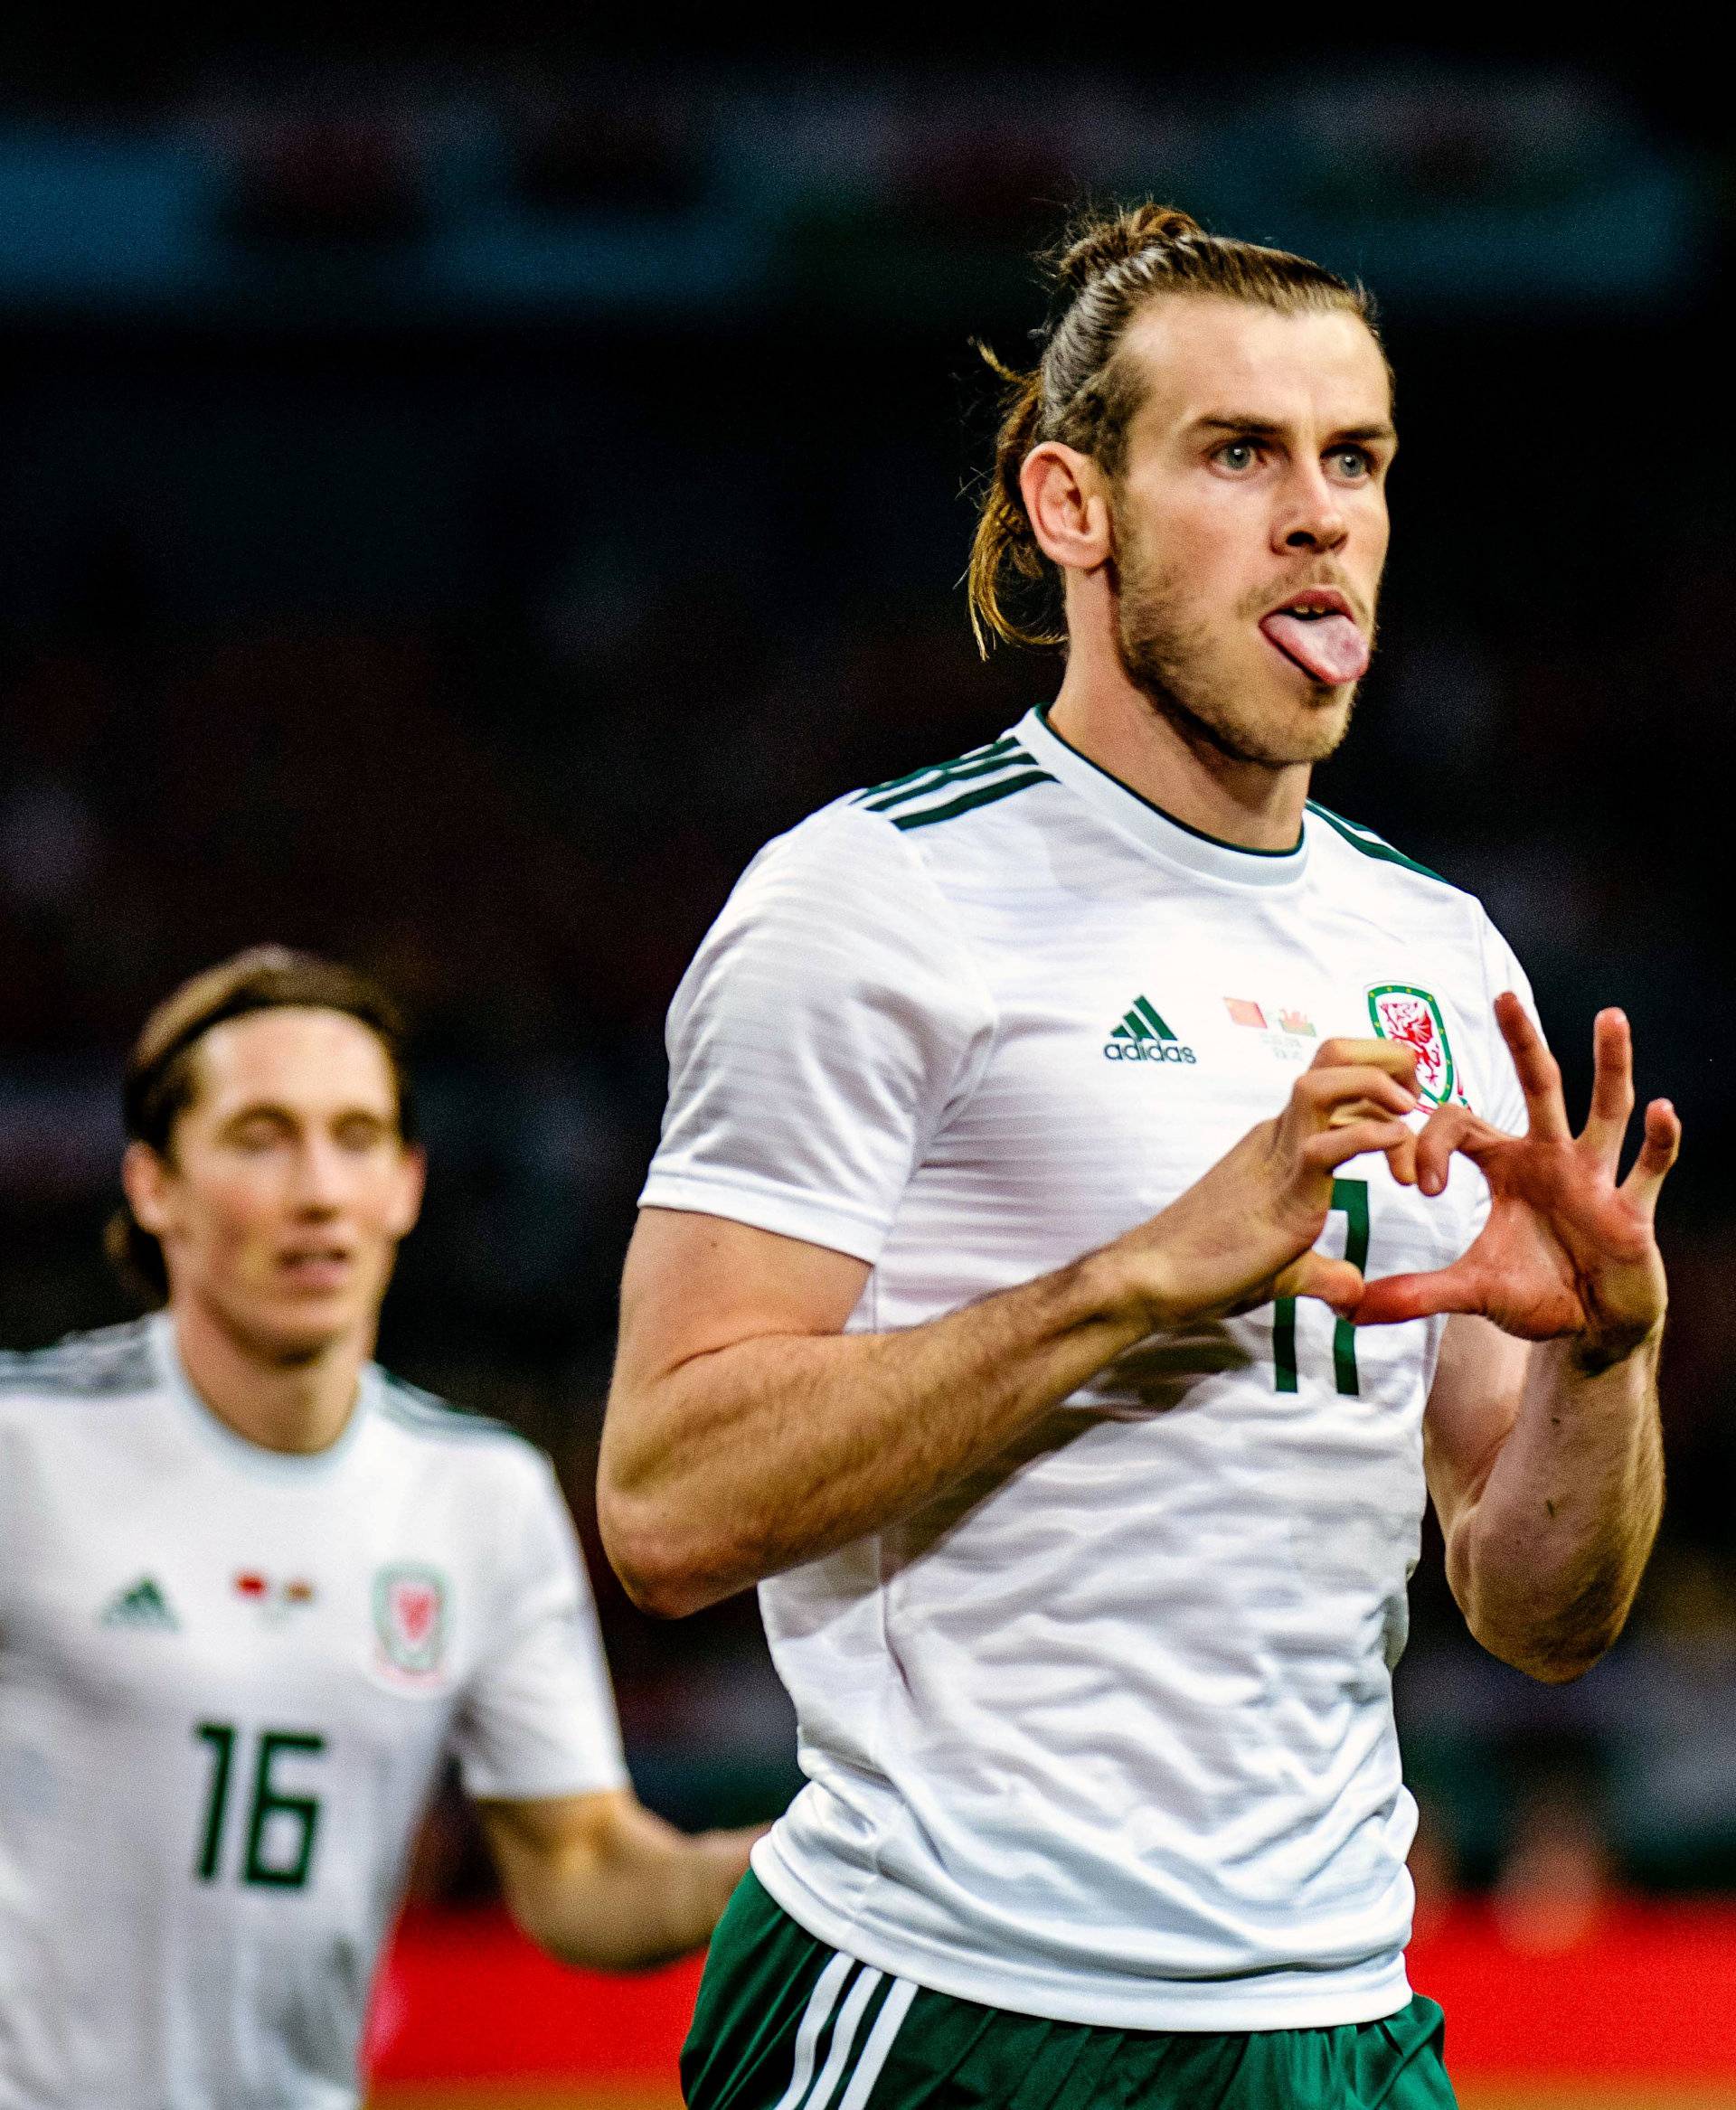 China Cup Semi-Finals - Gareth Bale of Wales celebrates after scoring a goal